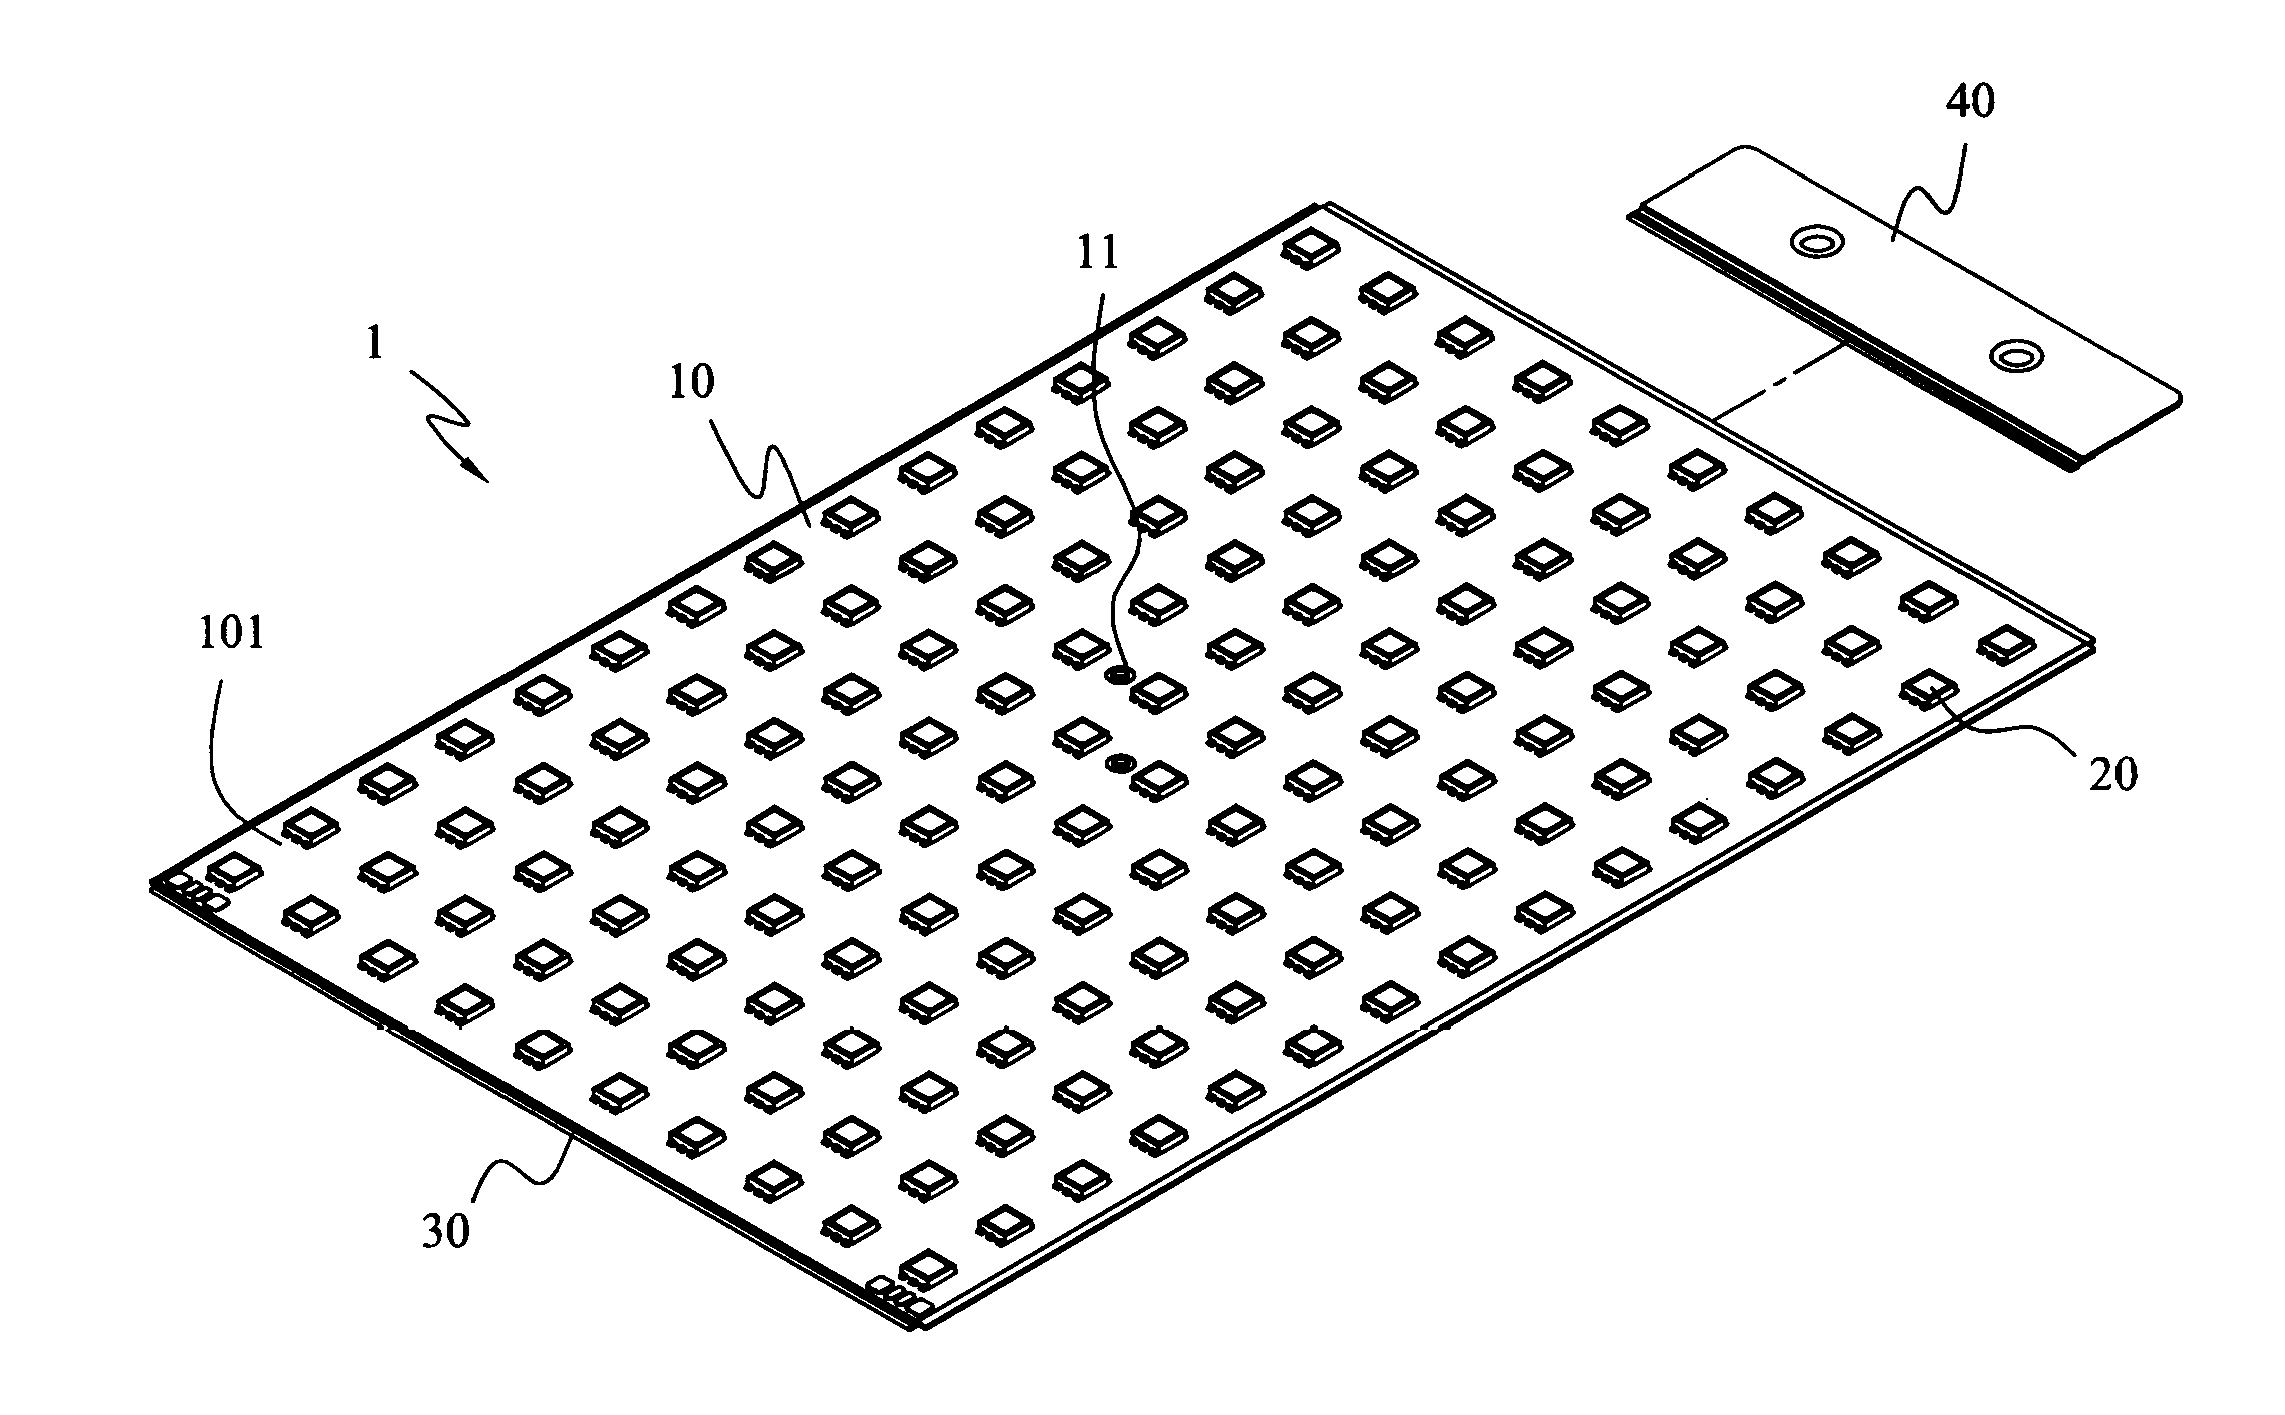 Modular LED display structure with connecting edge banding to connect each other